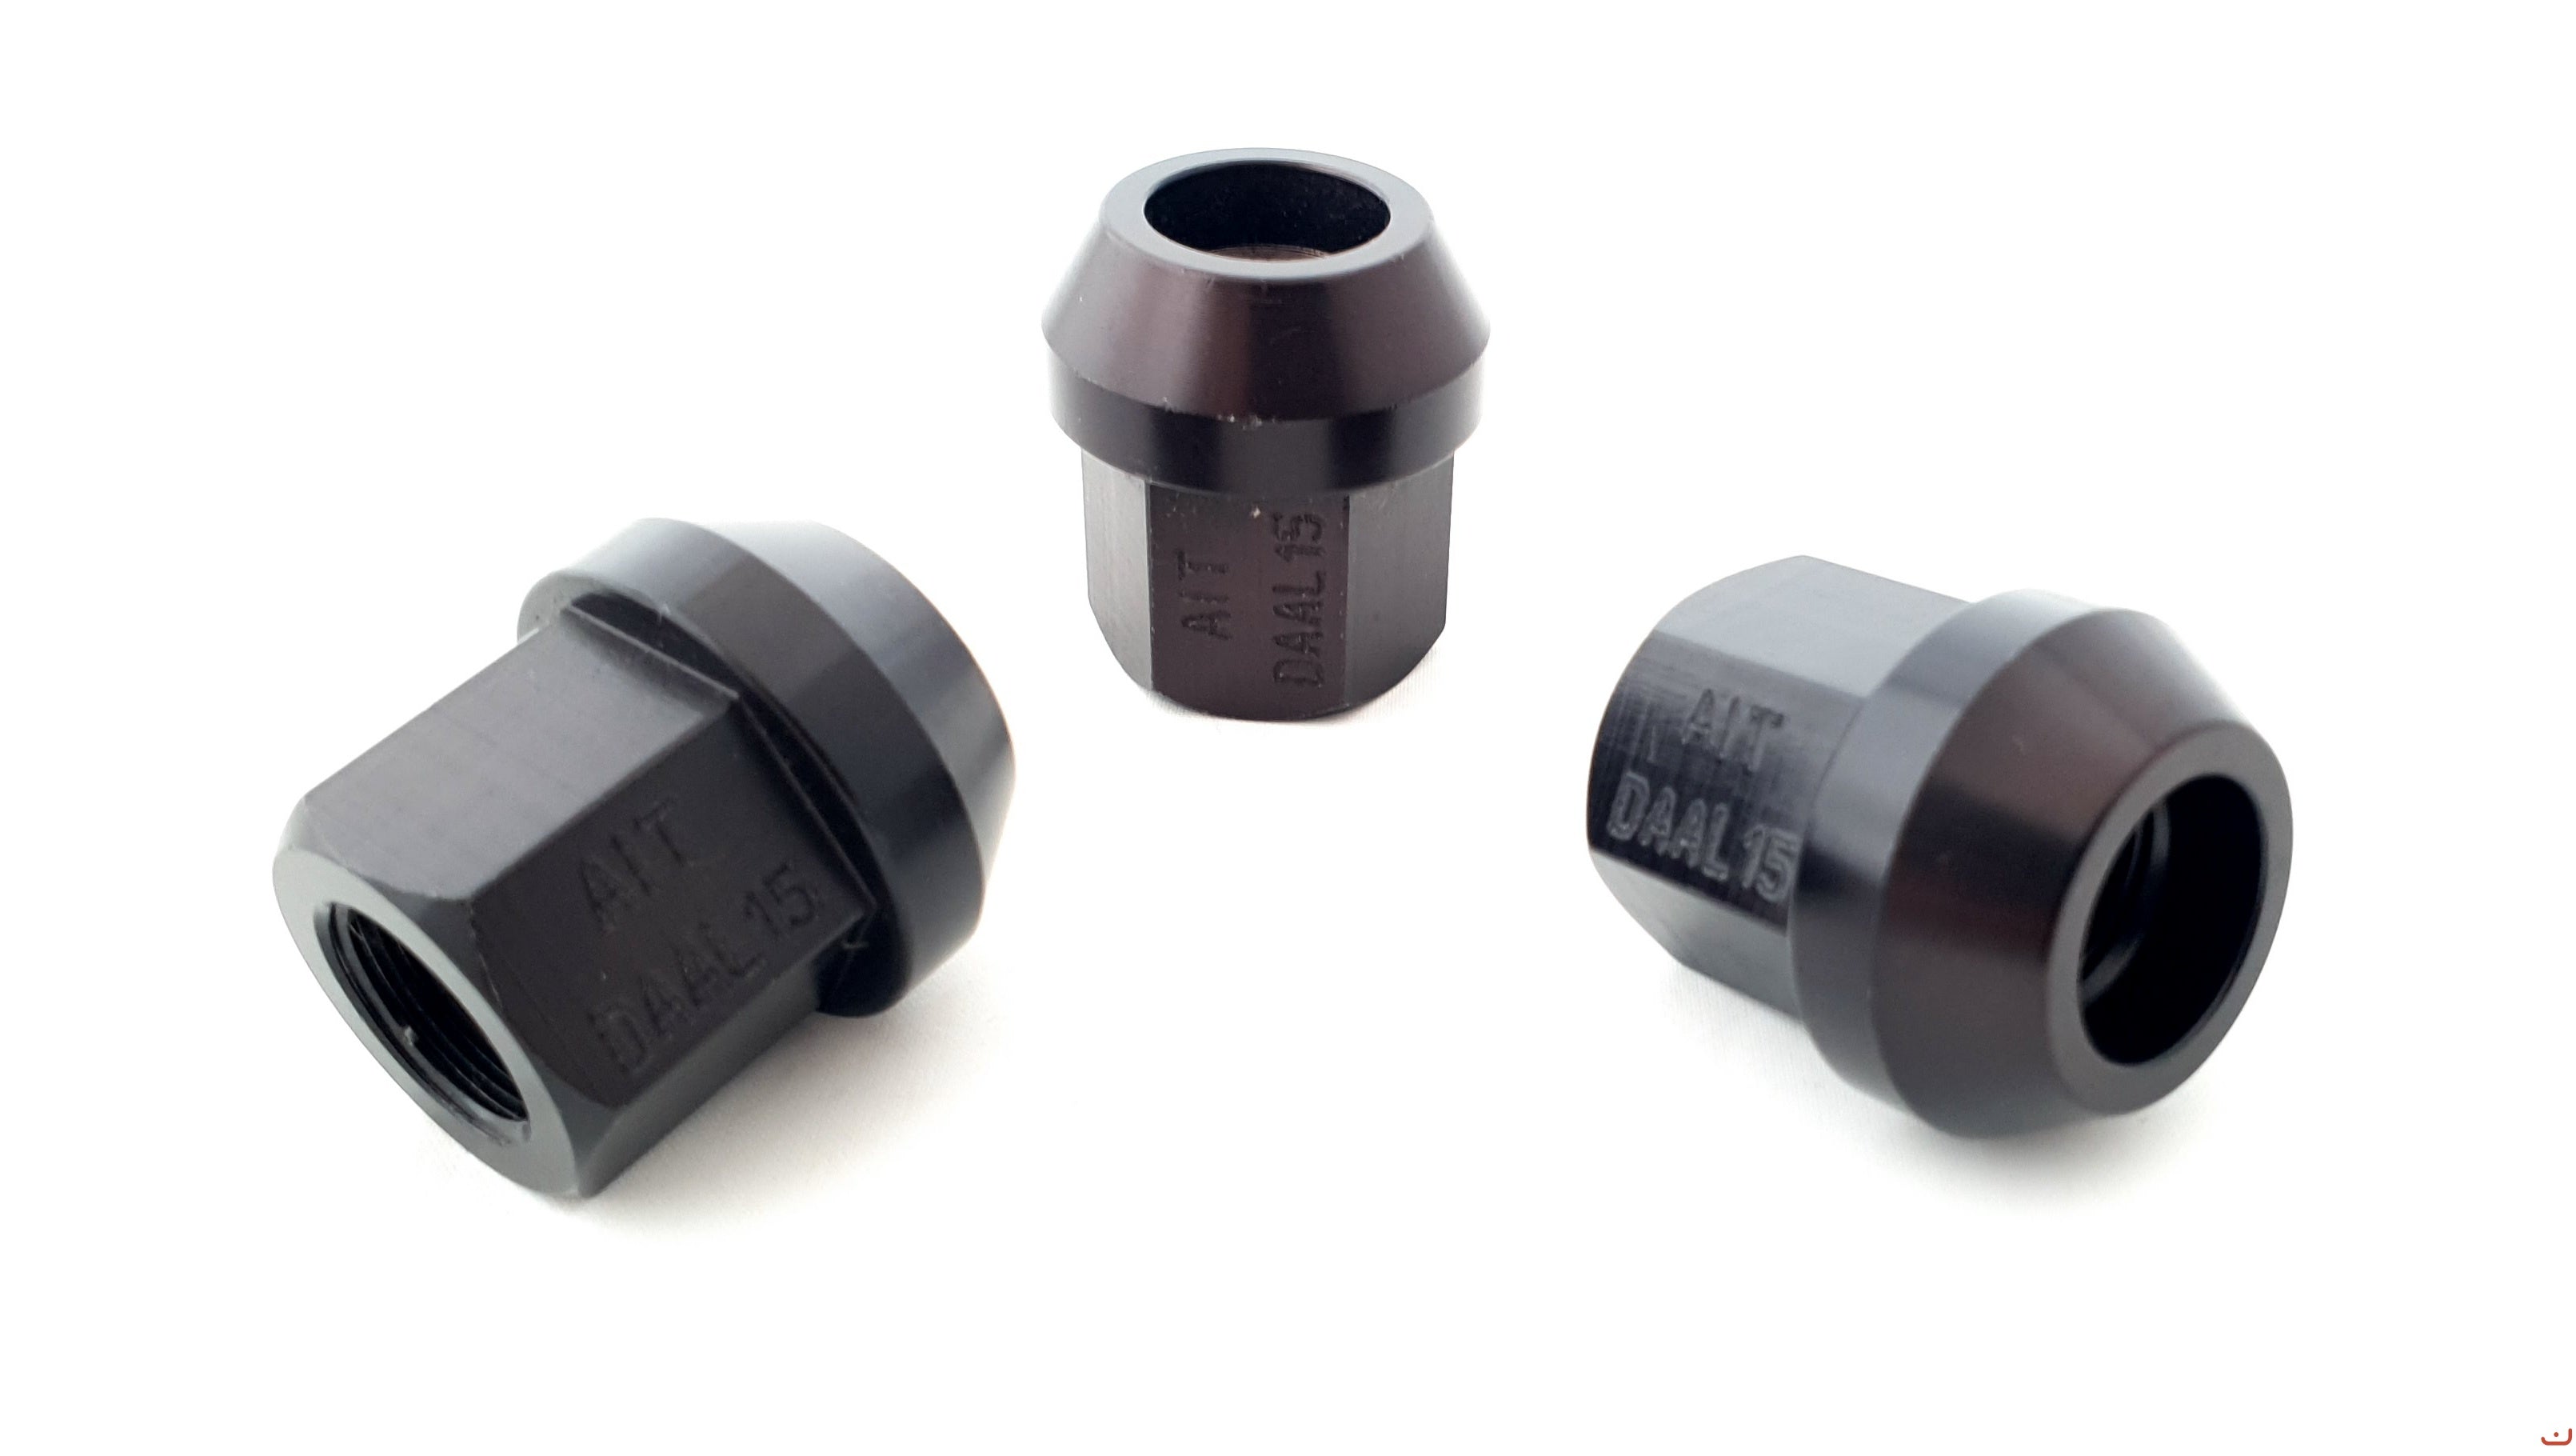 A.I.TECH AIT-DAAL15 1 / 2" UNF Ergal alloy competition nut (black) ex 3 / 4", o.d. 25mm conical SEAT, total lenght 27mm Photo-0 